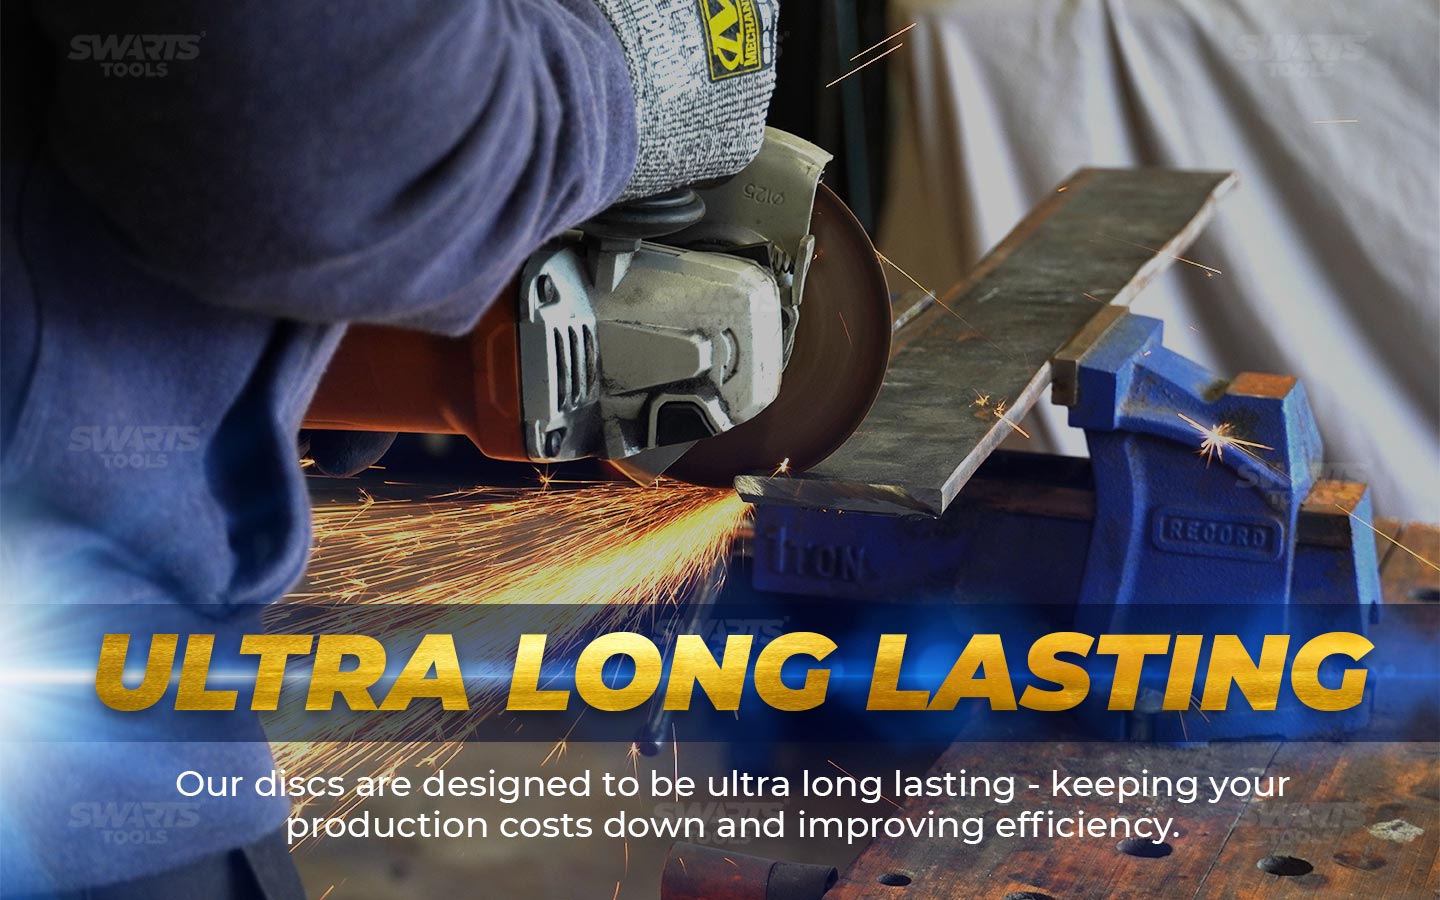 Ultra long lasting, Our discs are designed to be ulra long lasting - keeping your production costs down and improving efficiency